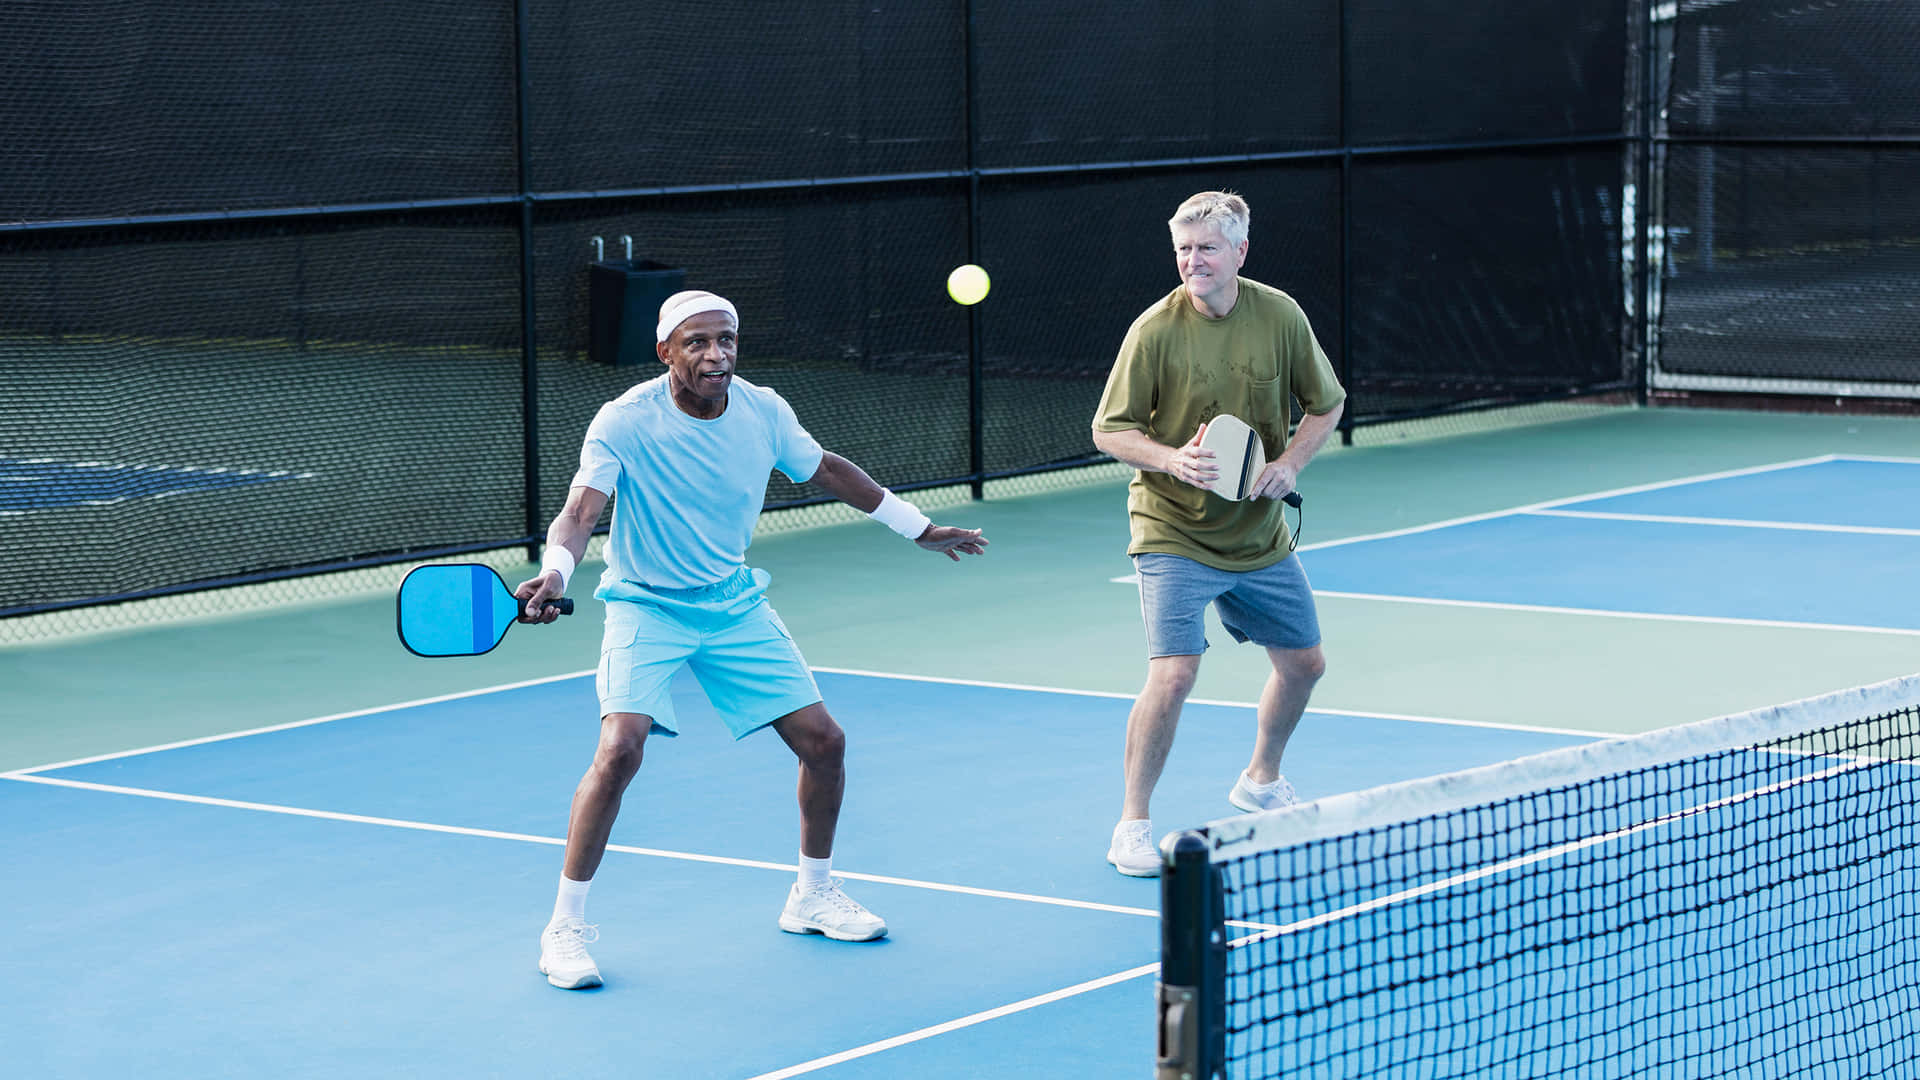 Play pickleball with friends and enjoy a fun court game